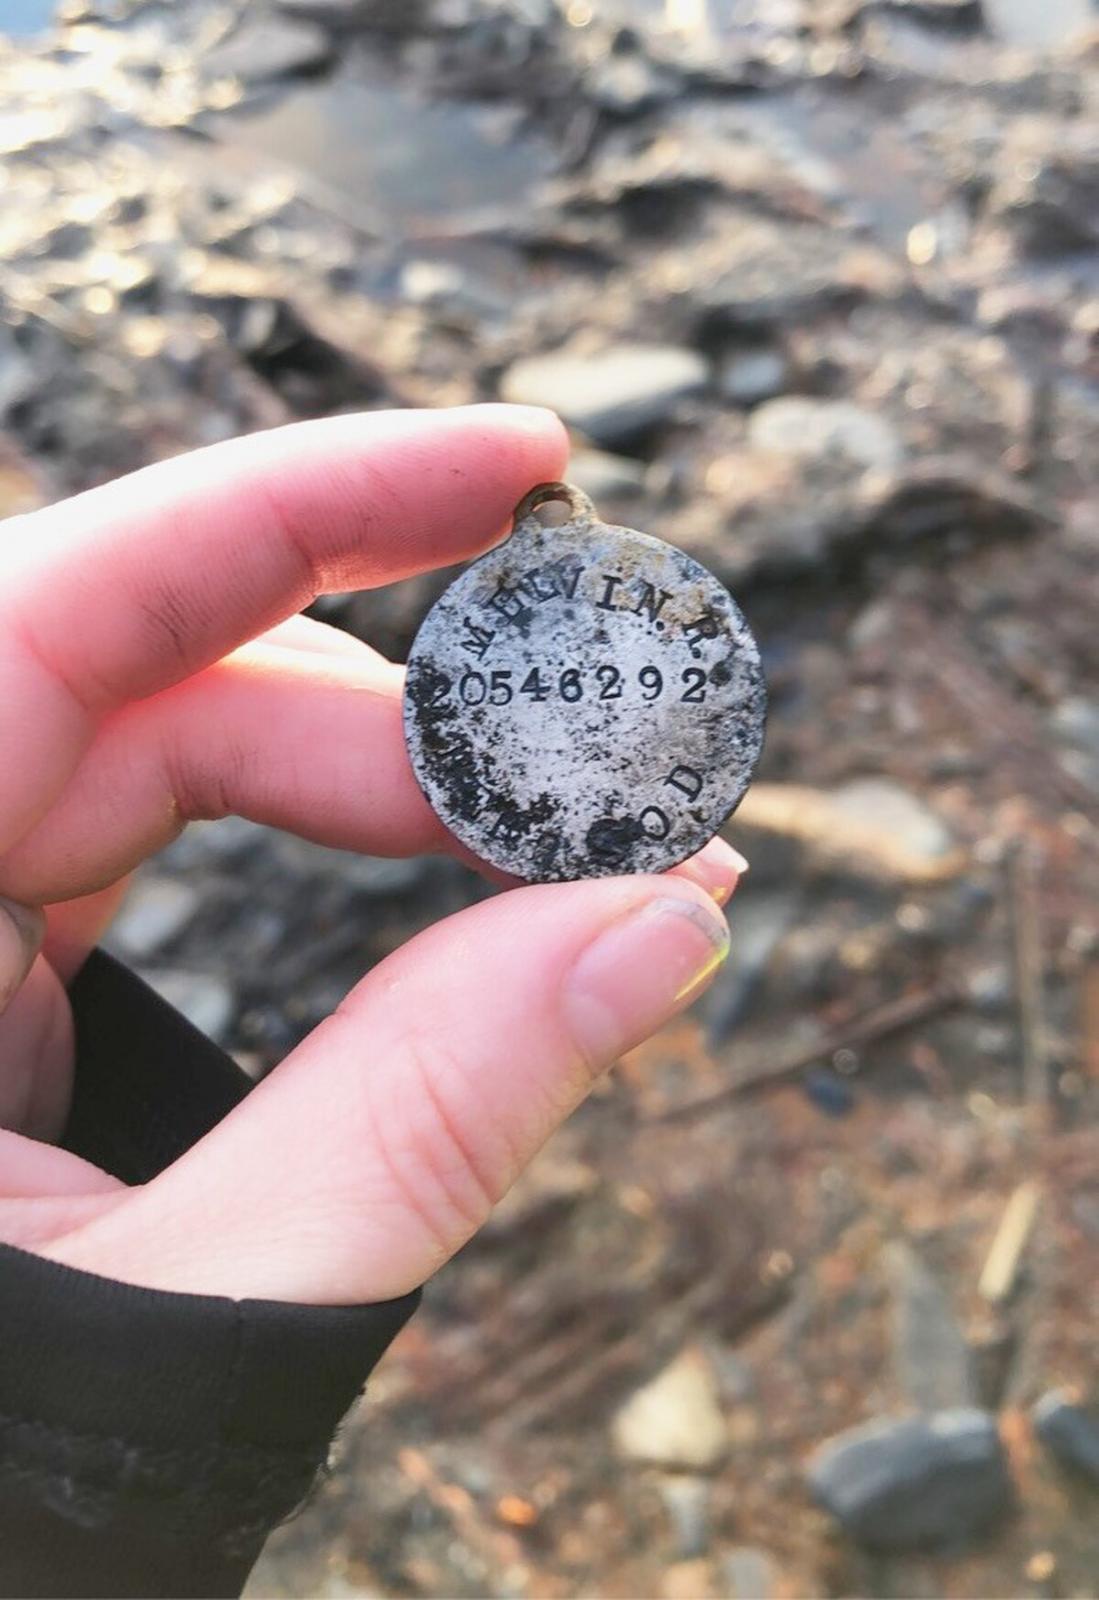 Michaela Maloney found this World War II dog tag of Sgt. Melvin R. Herrod in November 2020 and has returned it to the soldier's son. (Michaela Maloney) Woman finds long-lost WWII and later dog tags on Alaska beach